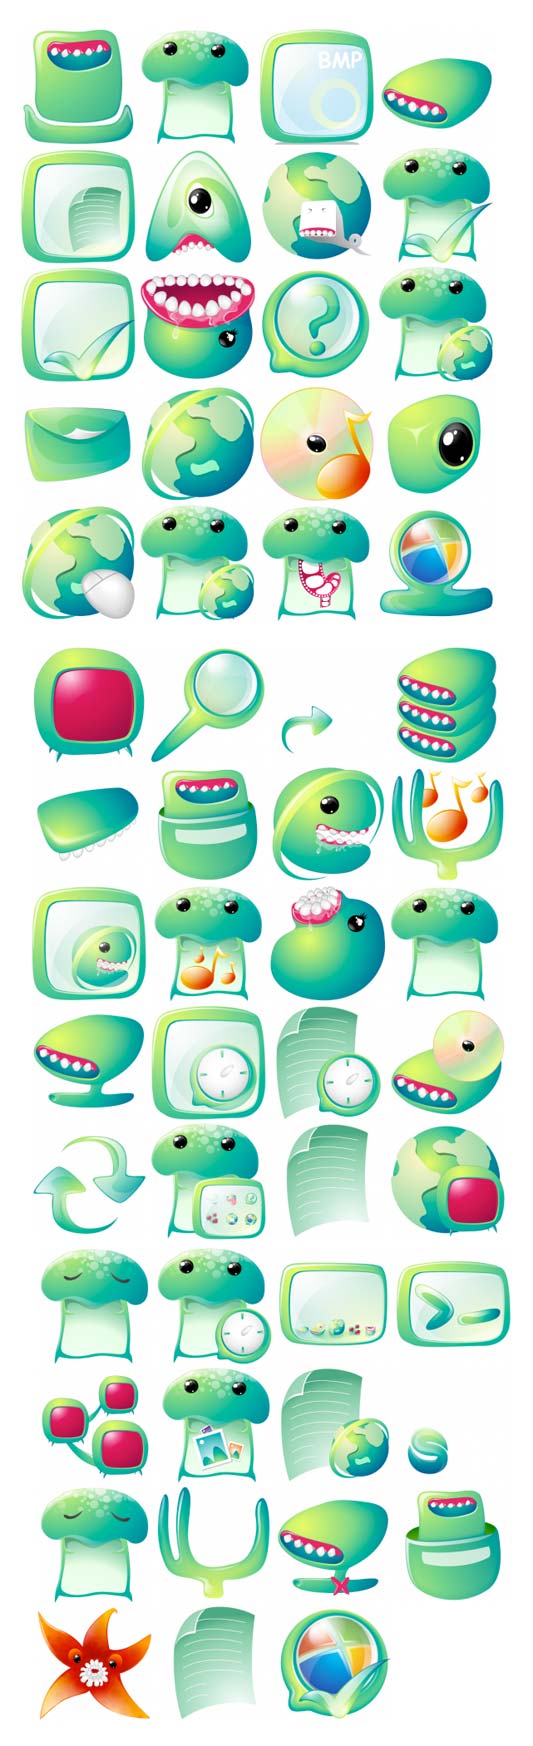 Green Creature Icons